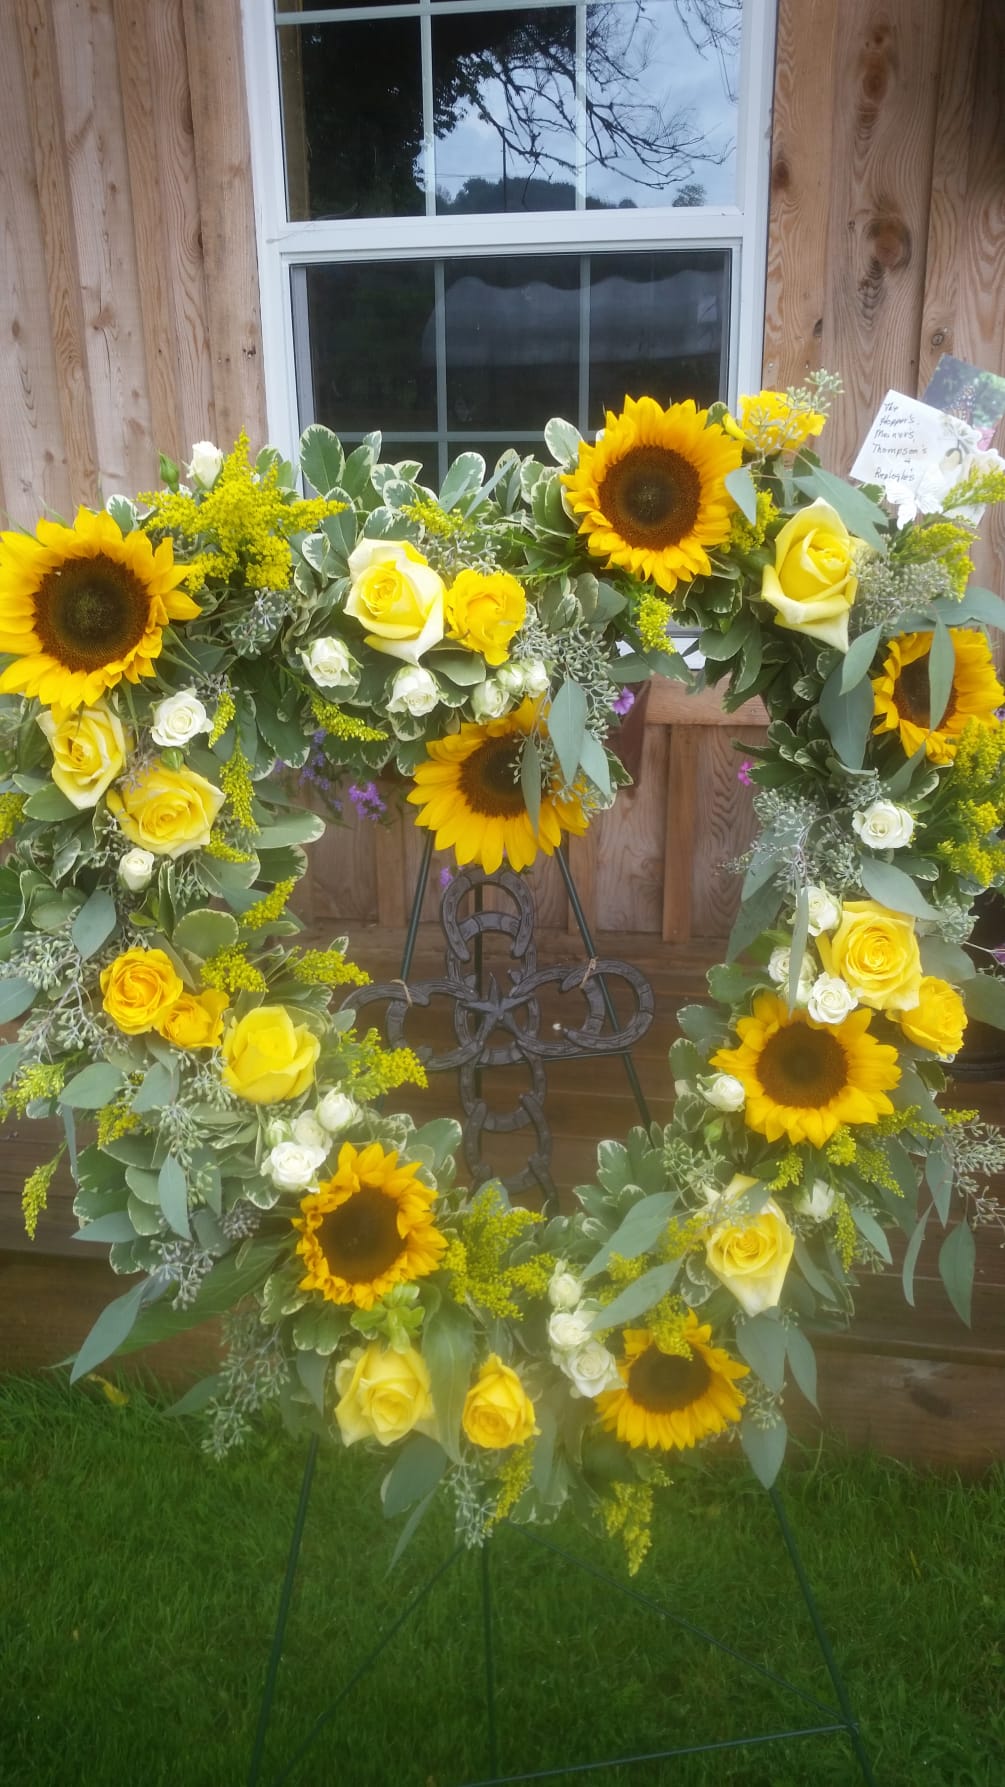 A beautiful heart filled with cheerful sunflowers, carnations, roses and seeded eucalyptus.